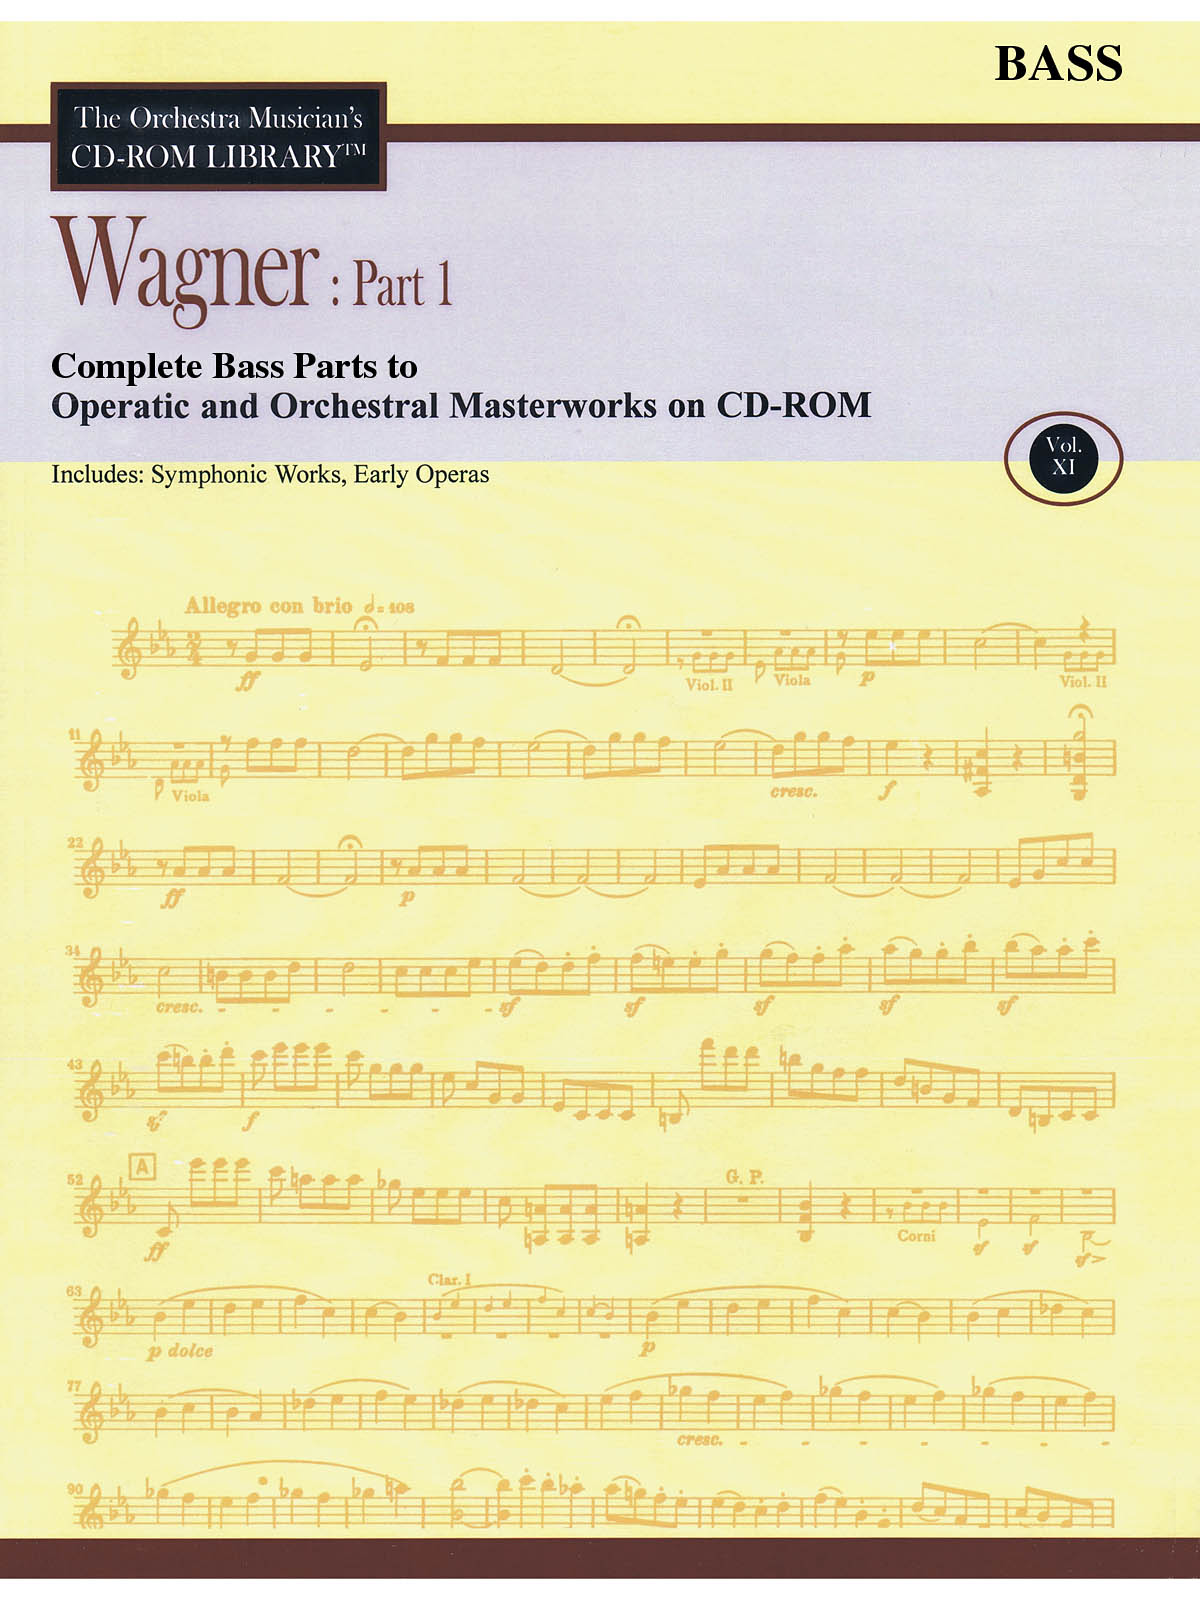 Wagner: Part 1 - Volume 11(The Orchestra Musician's CD-ROM Library - Double Bass)